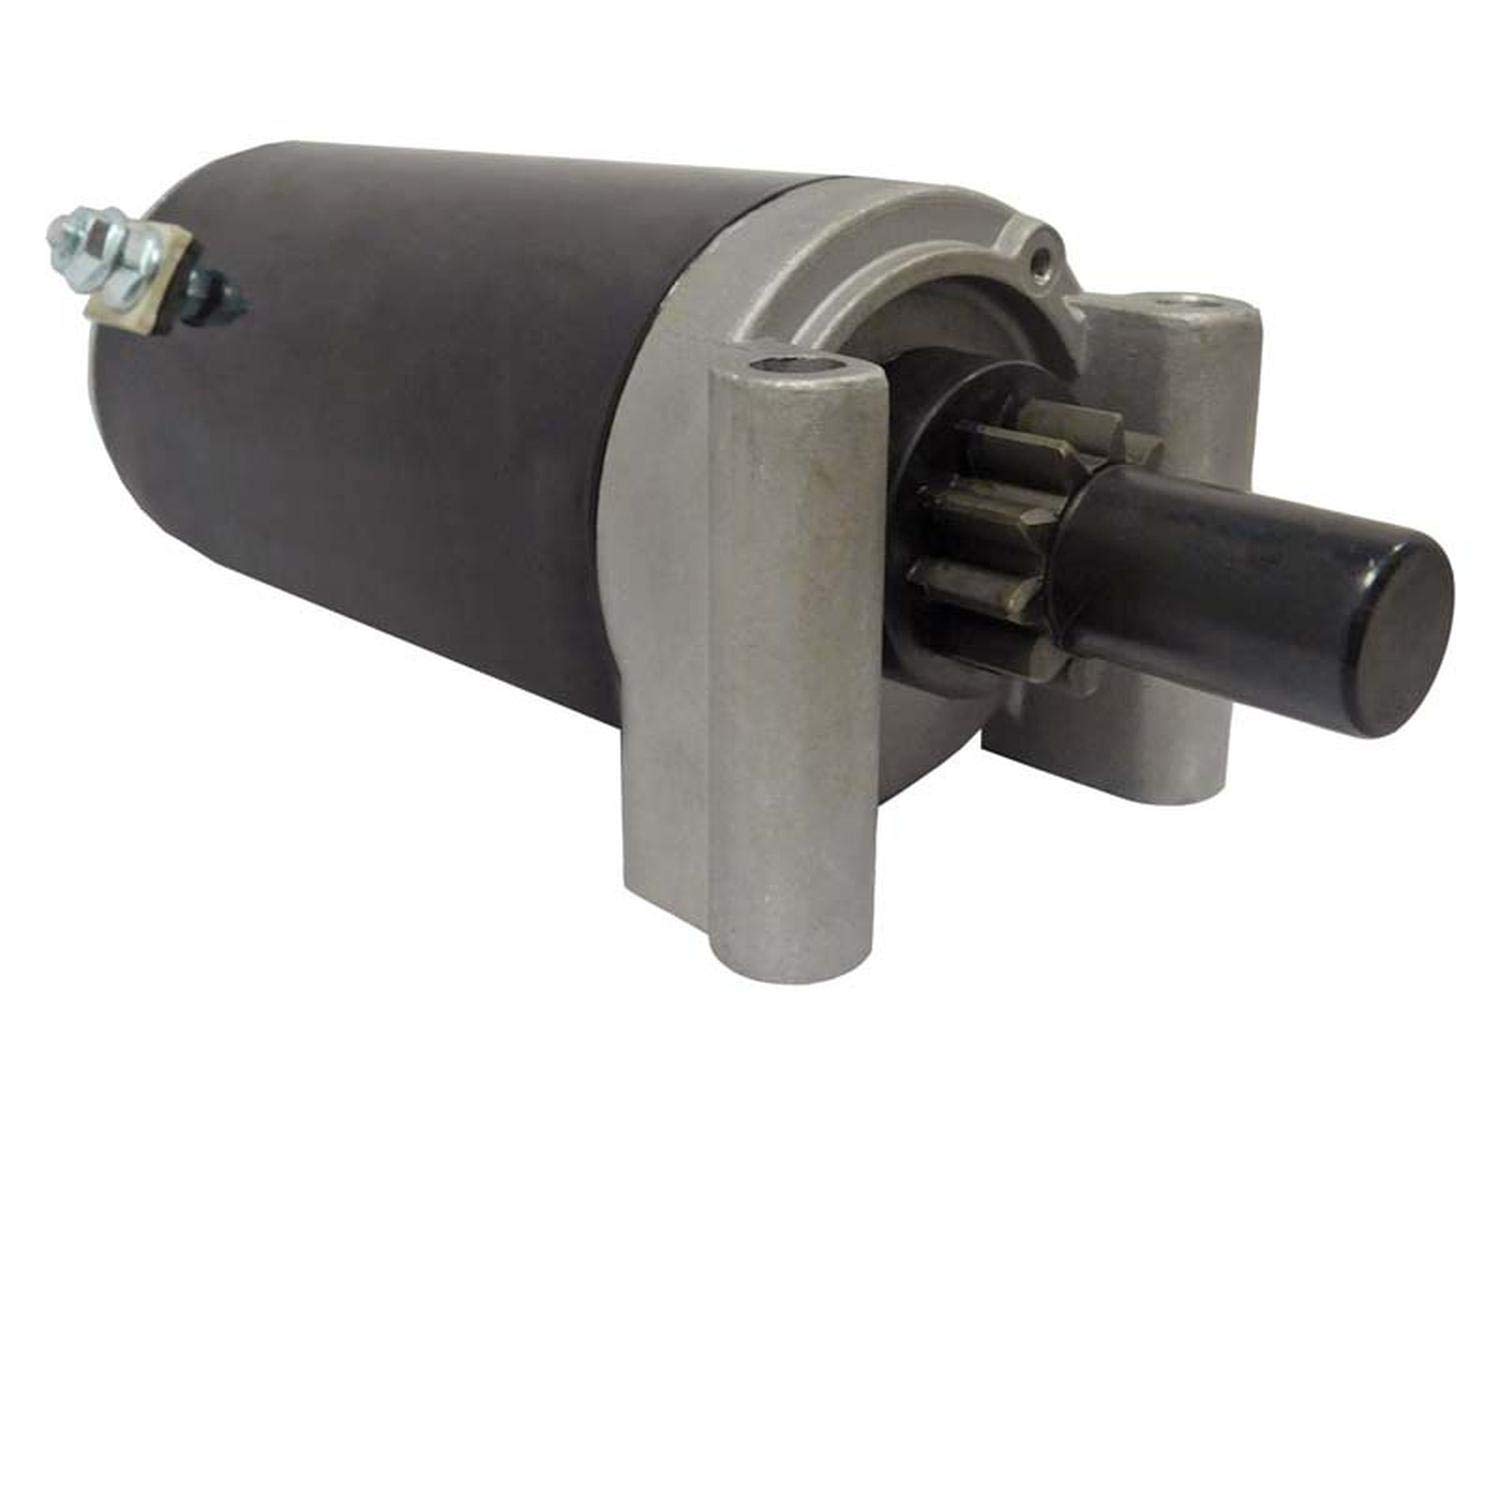 WAI 5801N Starter Compatible With Toro New Holland Industrial Cub Cadet Replaces K0H3209801S 32-098-01 32-098-01S 32-098-03 32-098-03S 32-098-04 32-098-04S UT-410 114075 90-5801 5801 von WAI